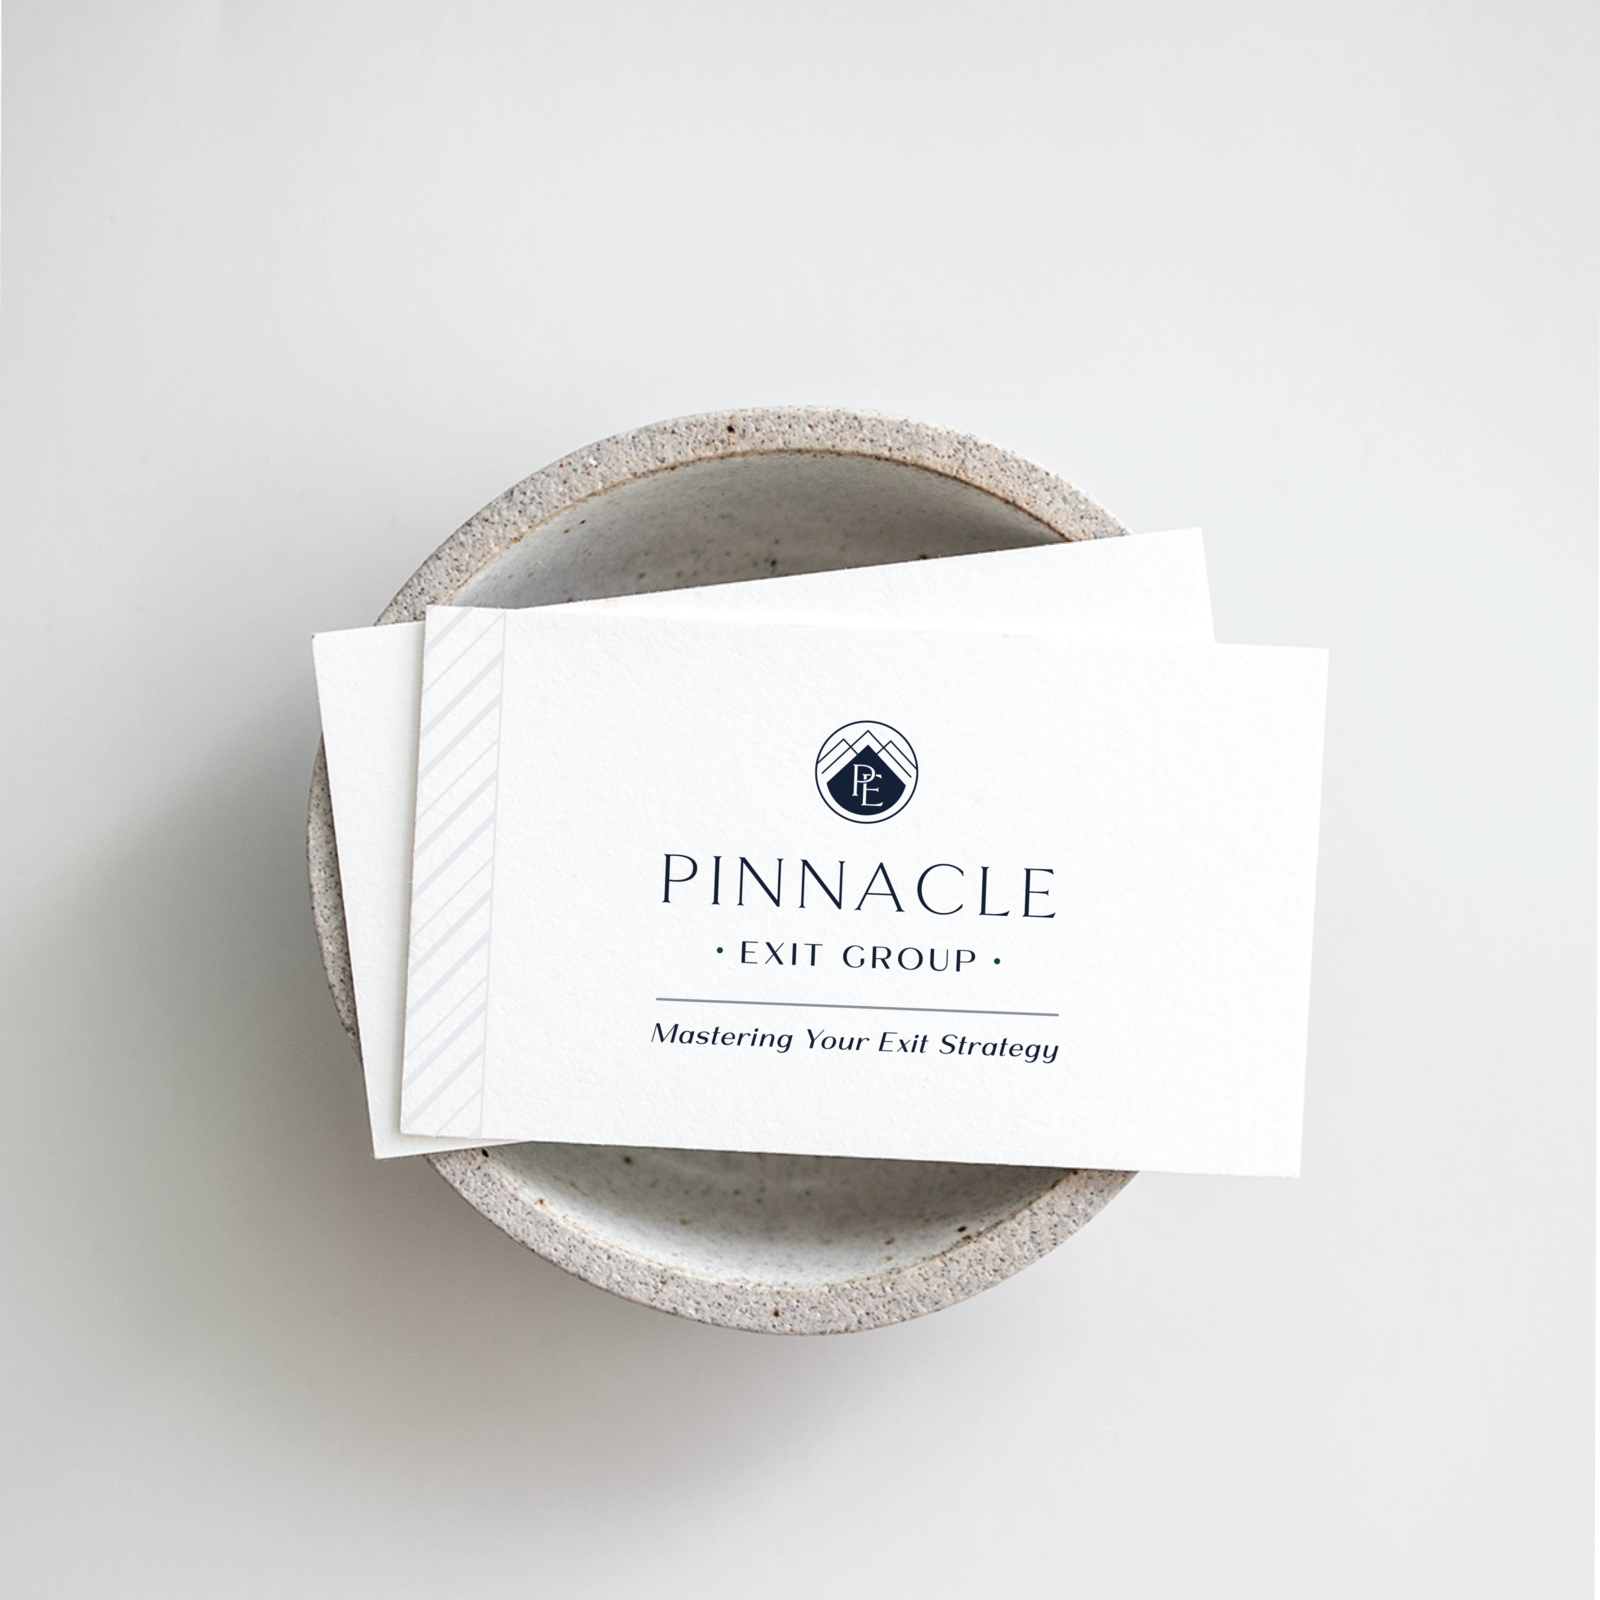 Business Card with logo for "Pinnacle Exit Group"